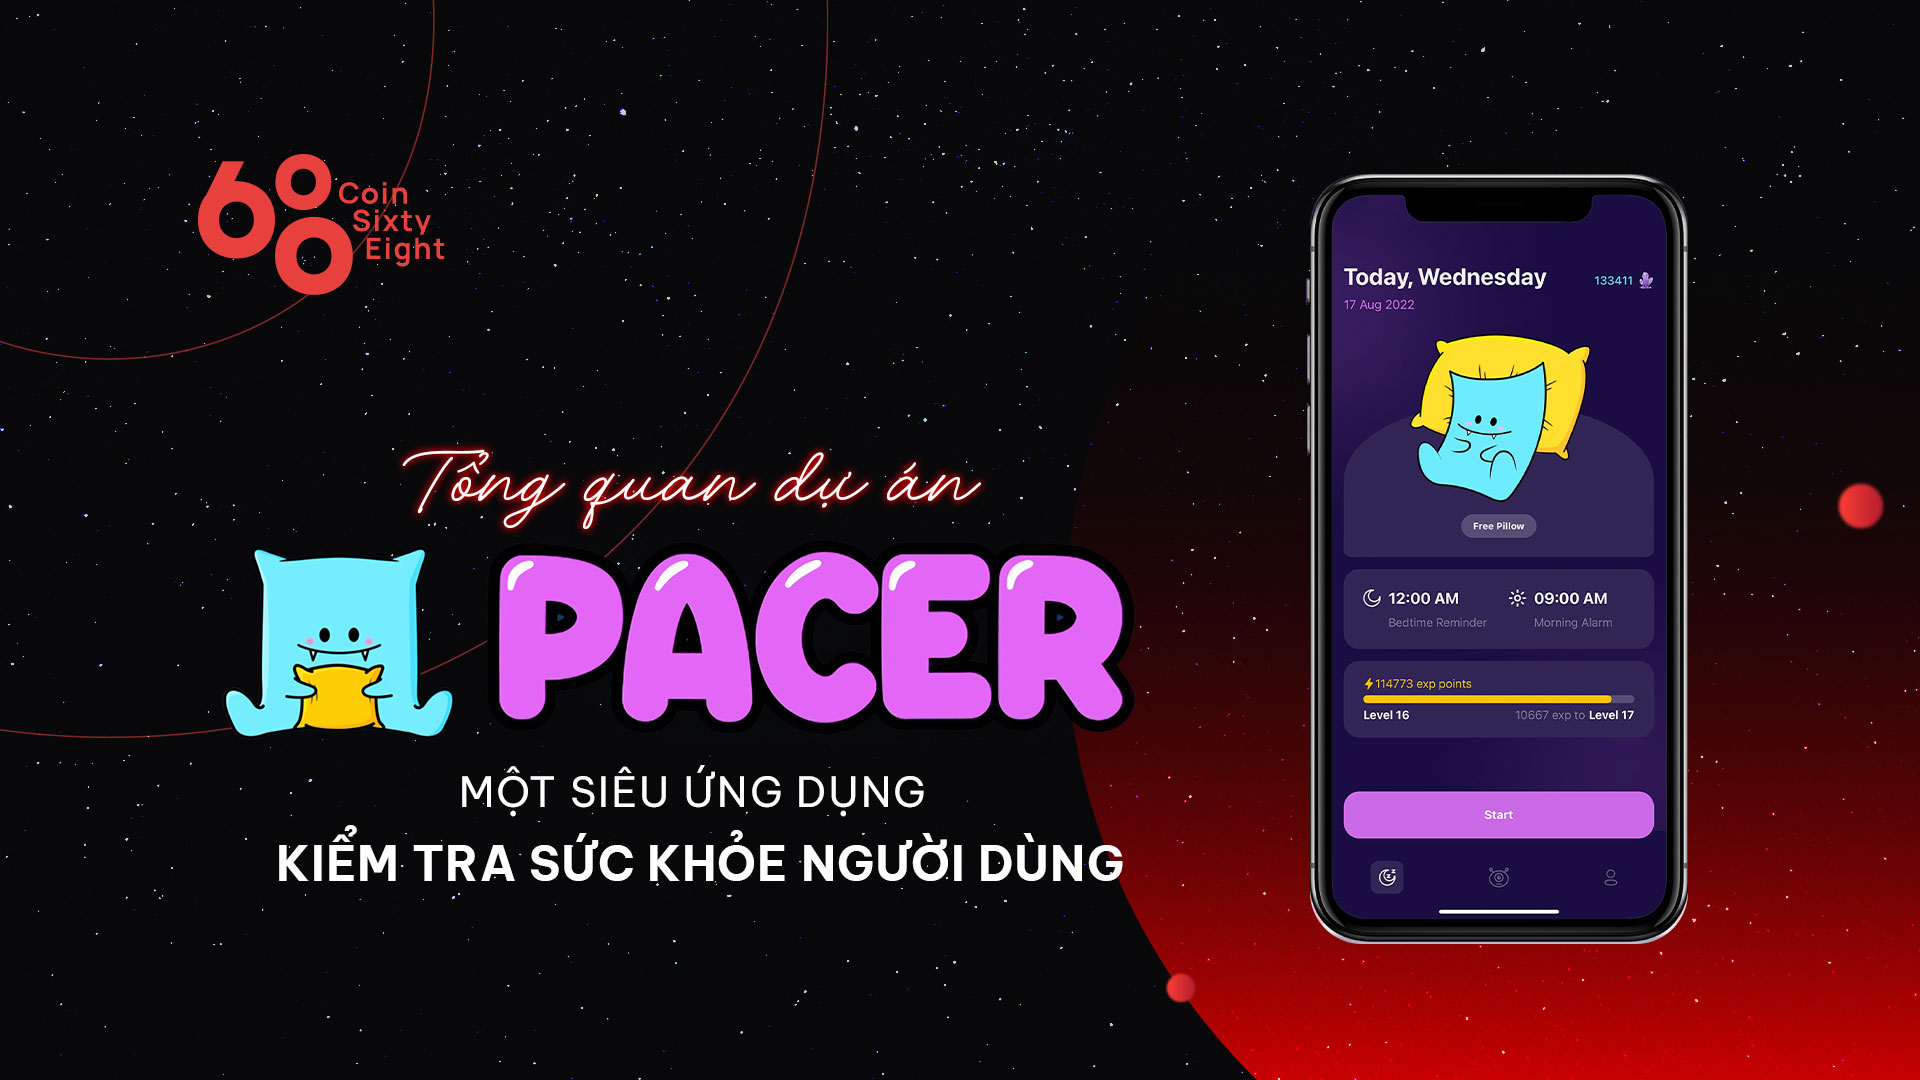 What is the Pacer project?